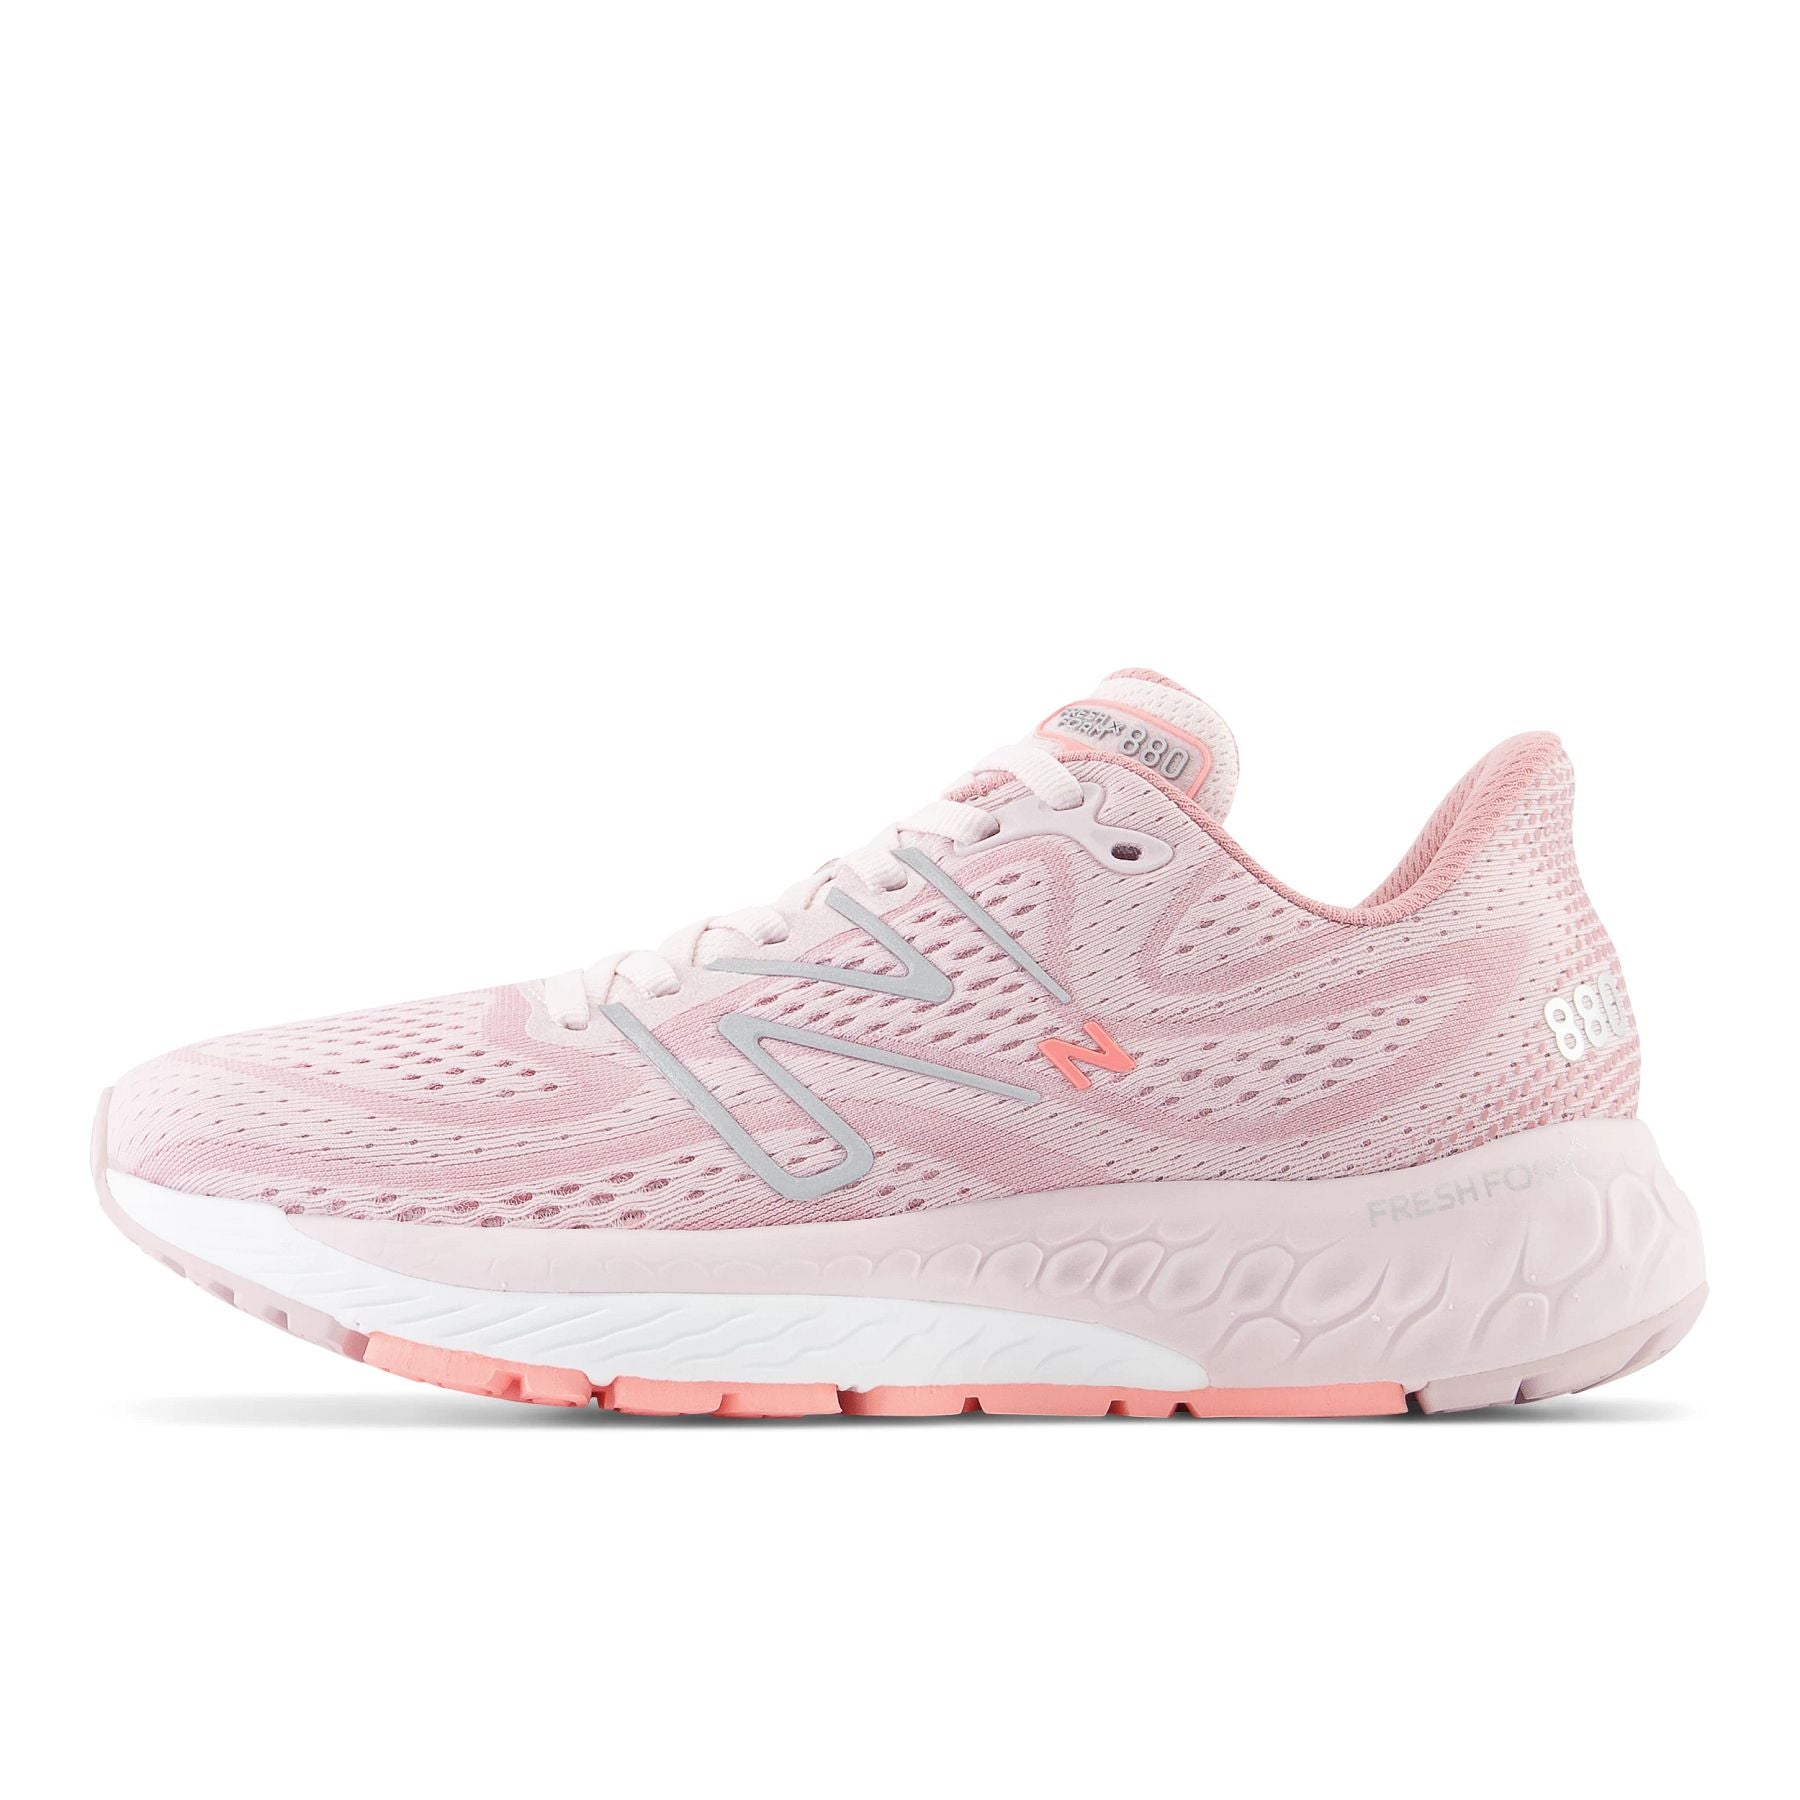 Medial view of the Women's New Balance 880 V13 in the color Stone Pink